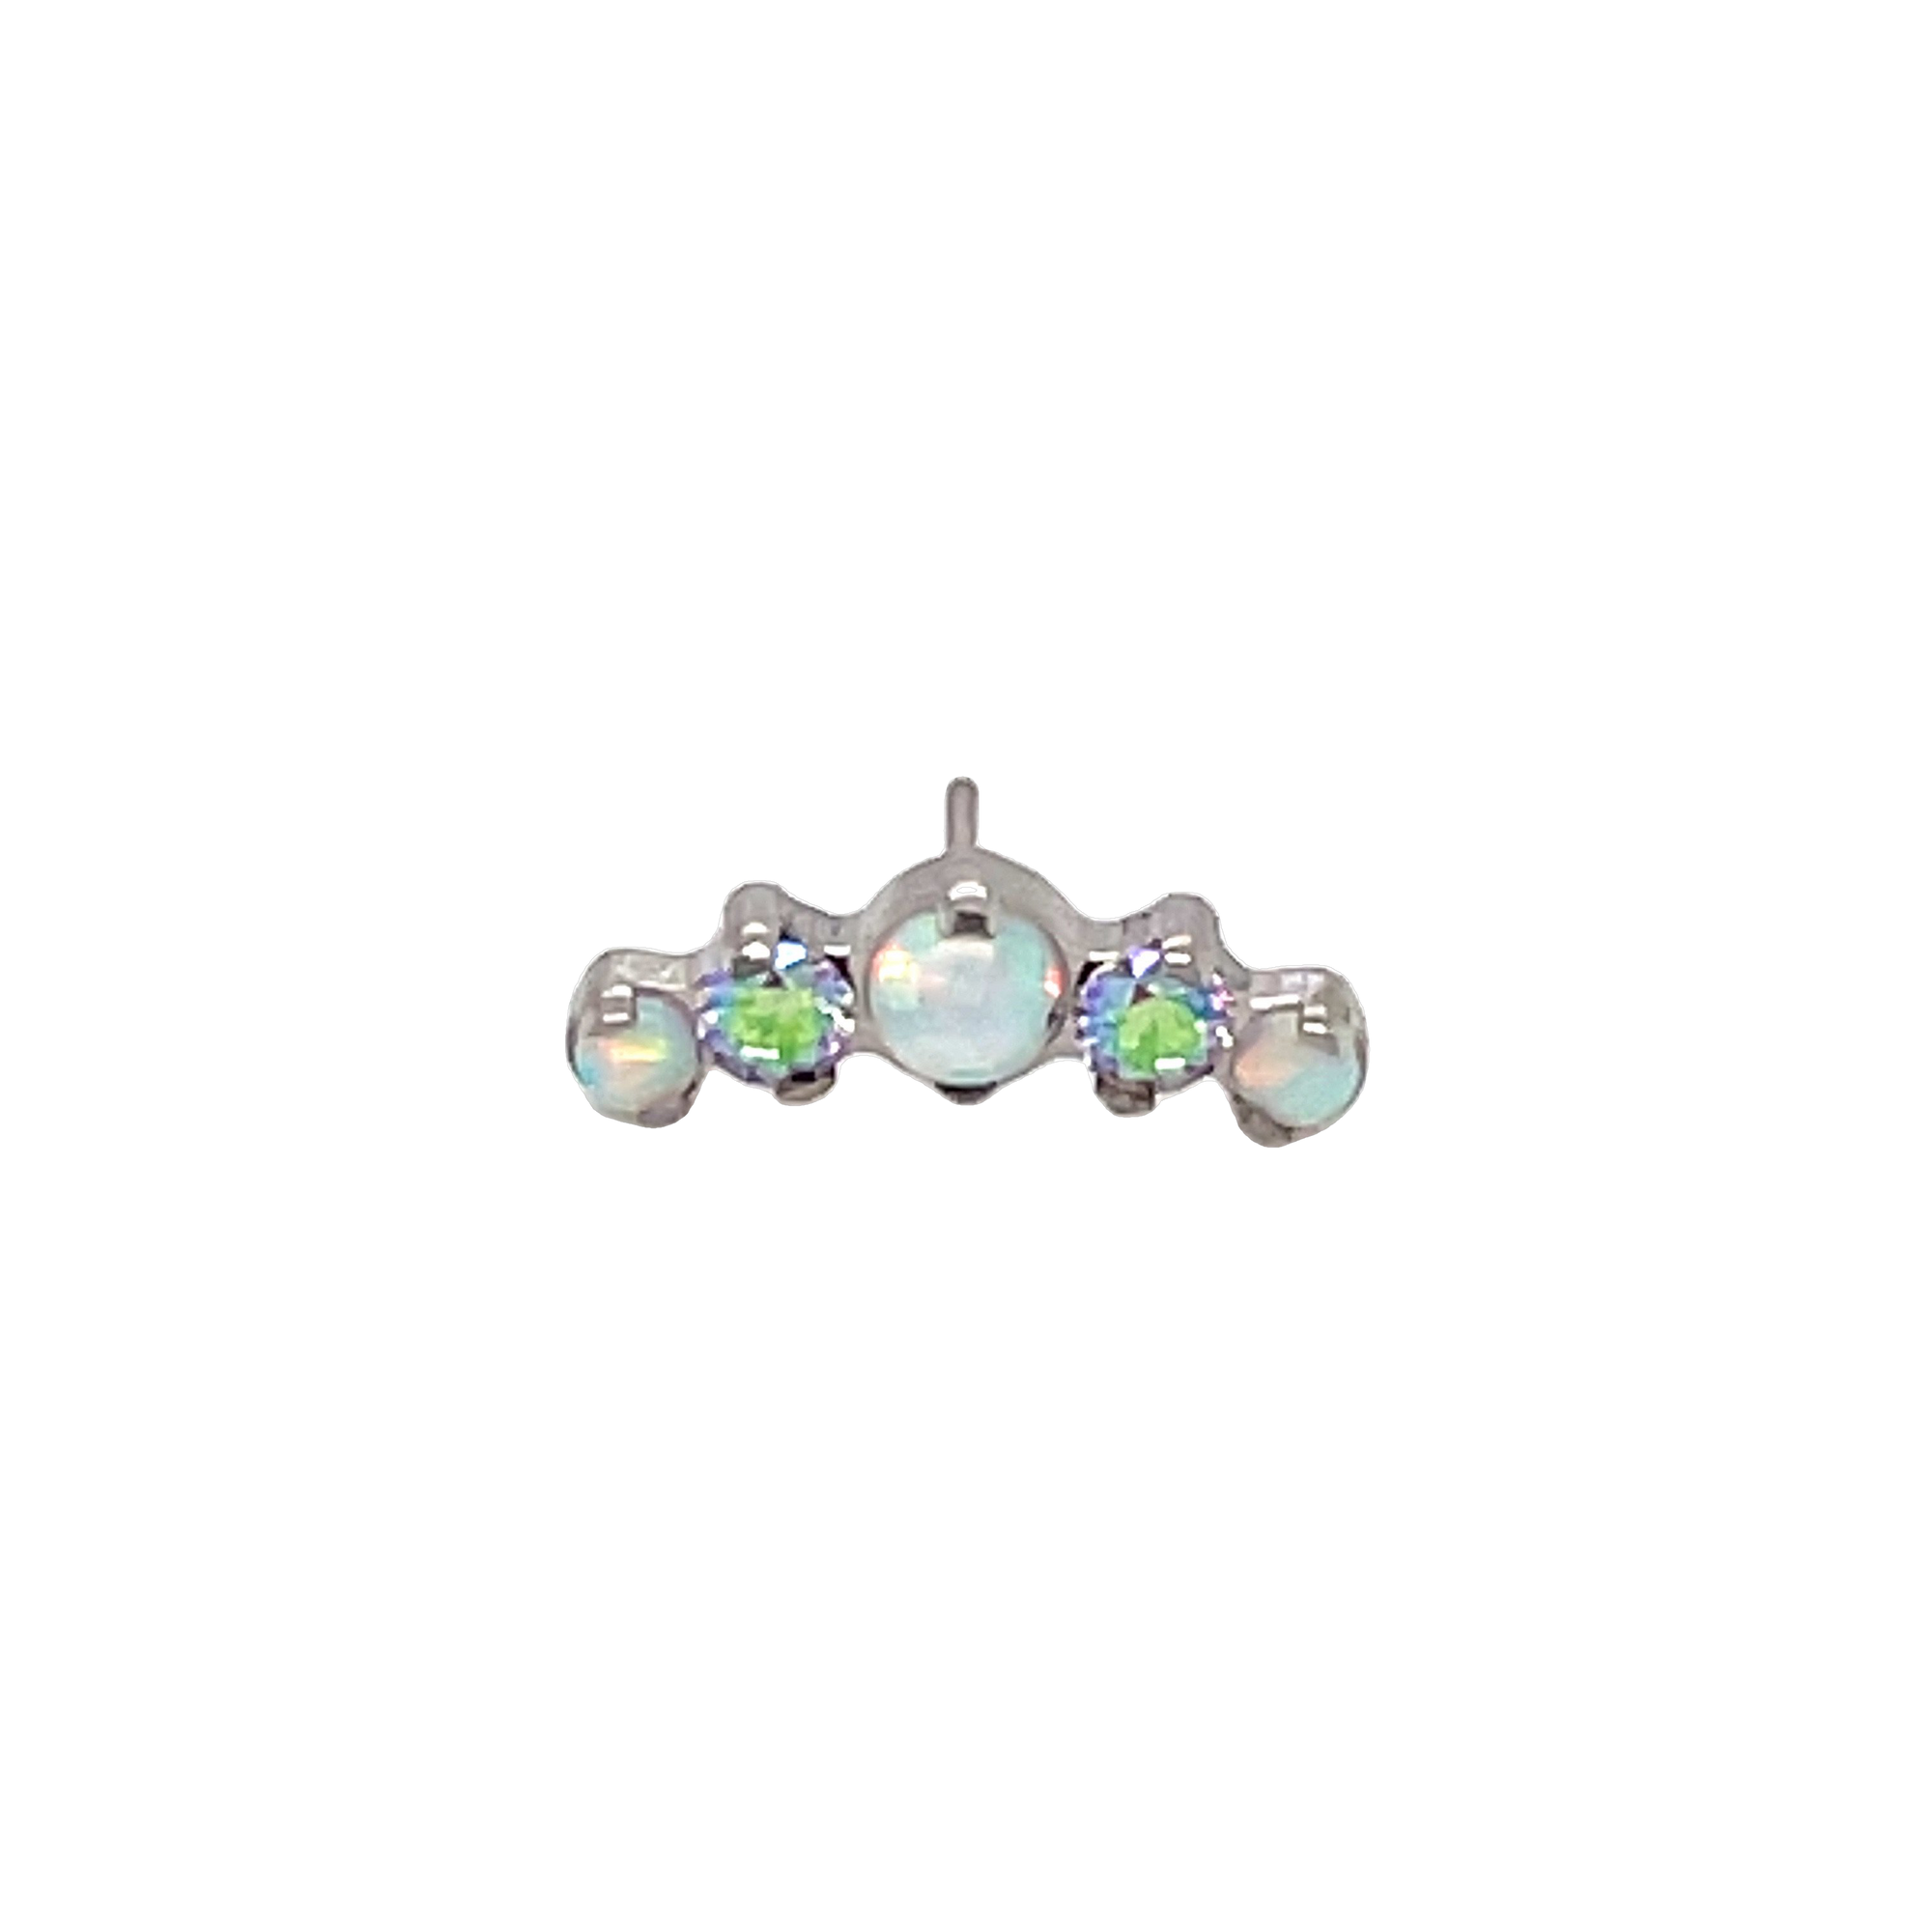 Industrial Strength Odyssey Prium in white opal and shine cz from isha body jewellery